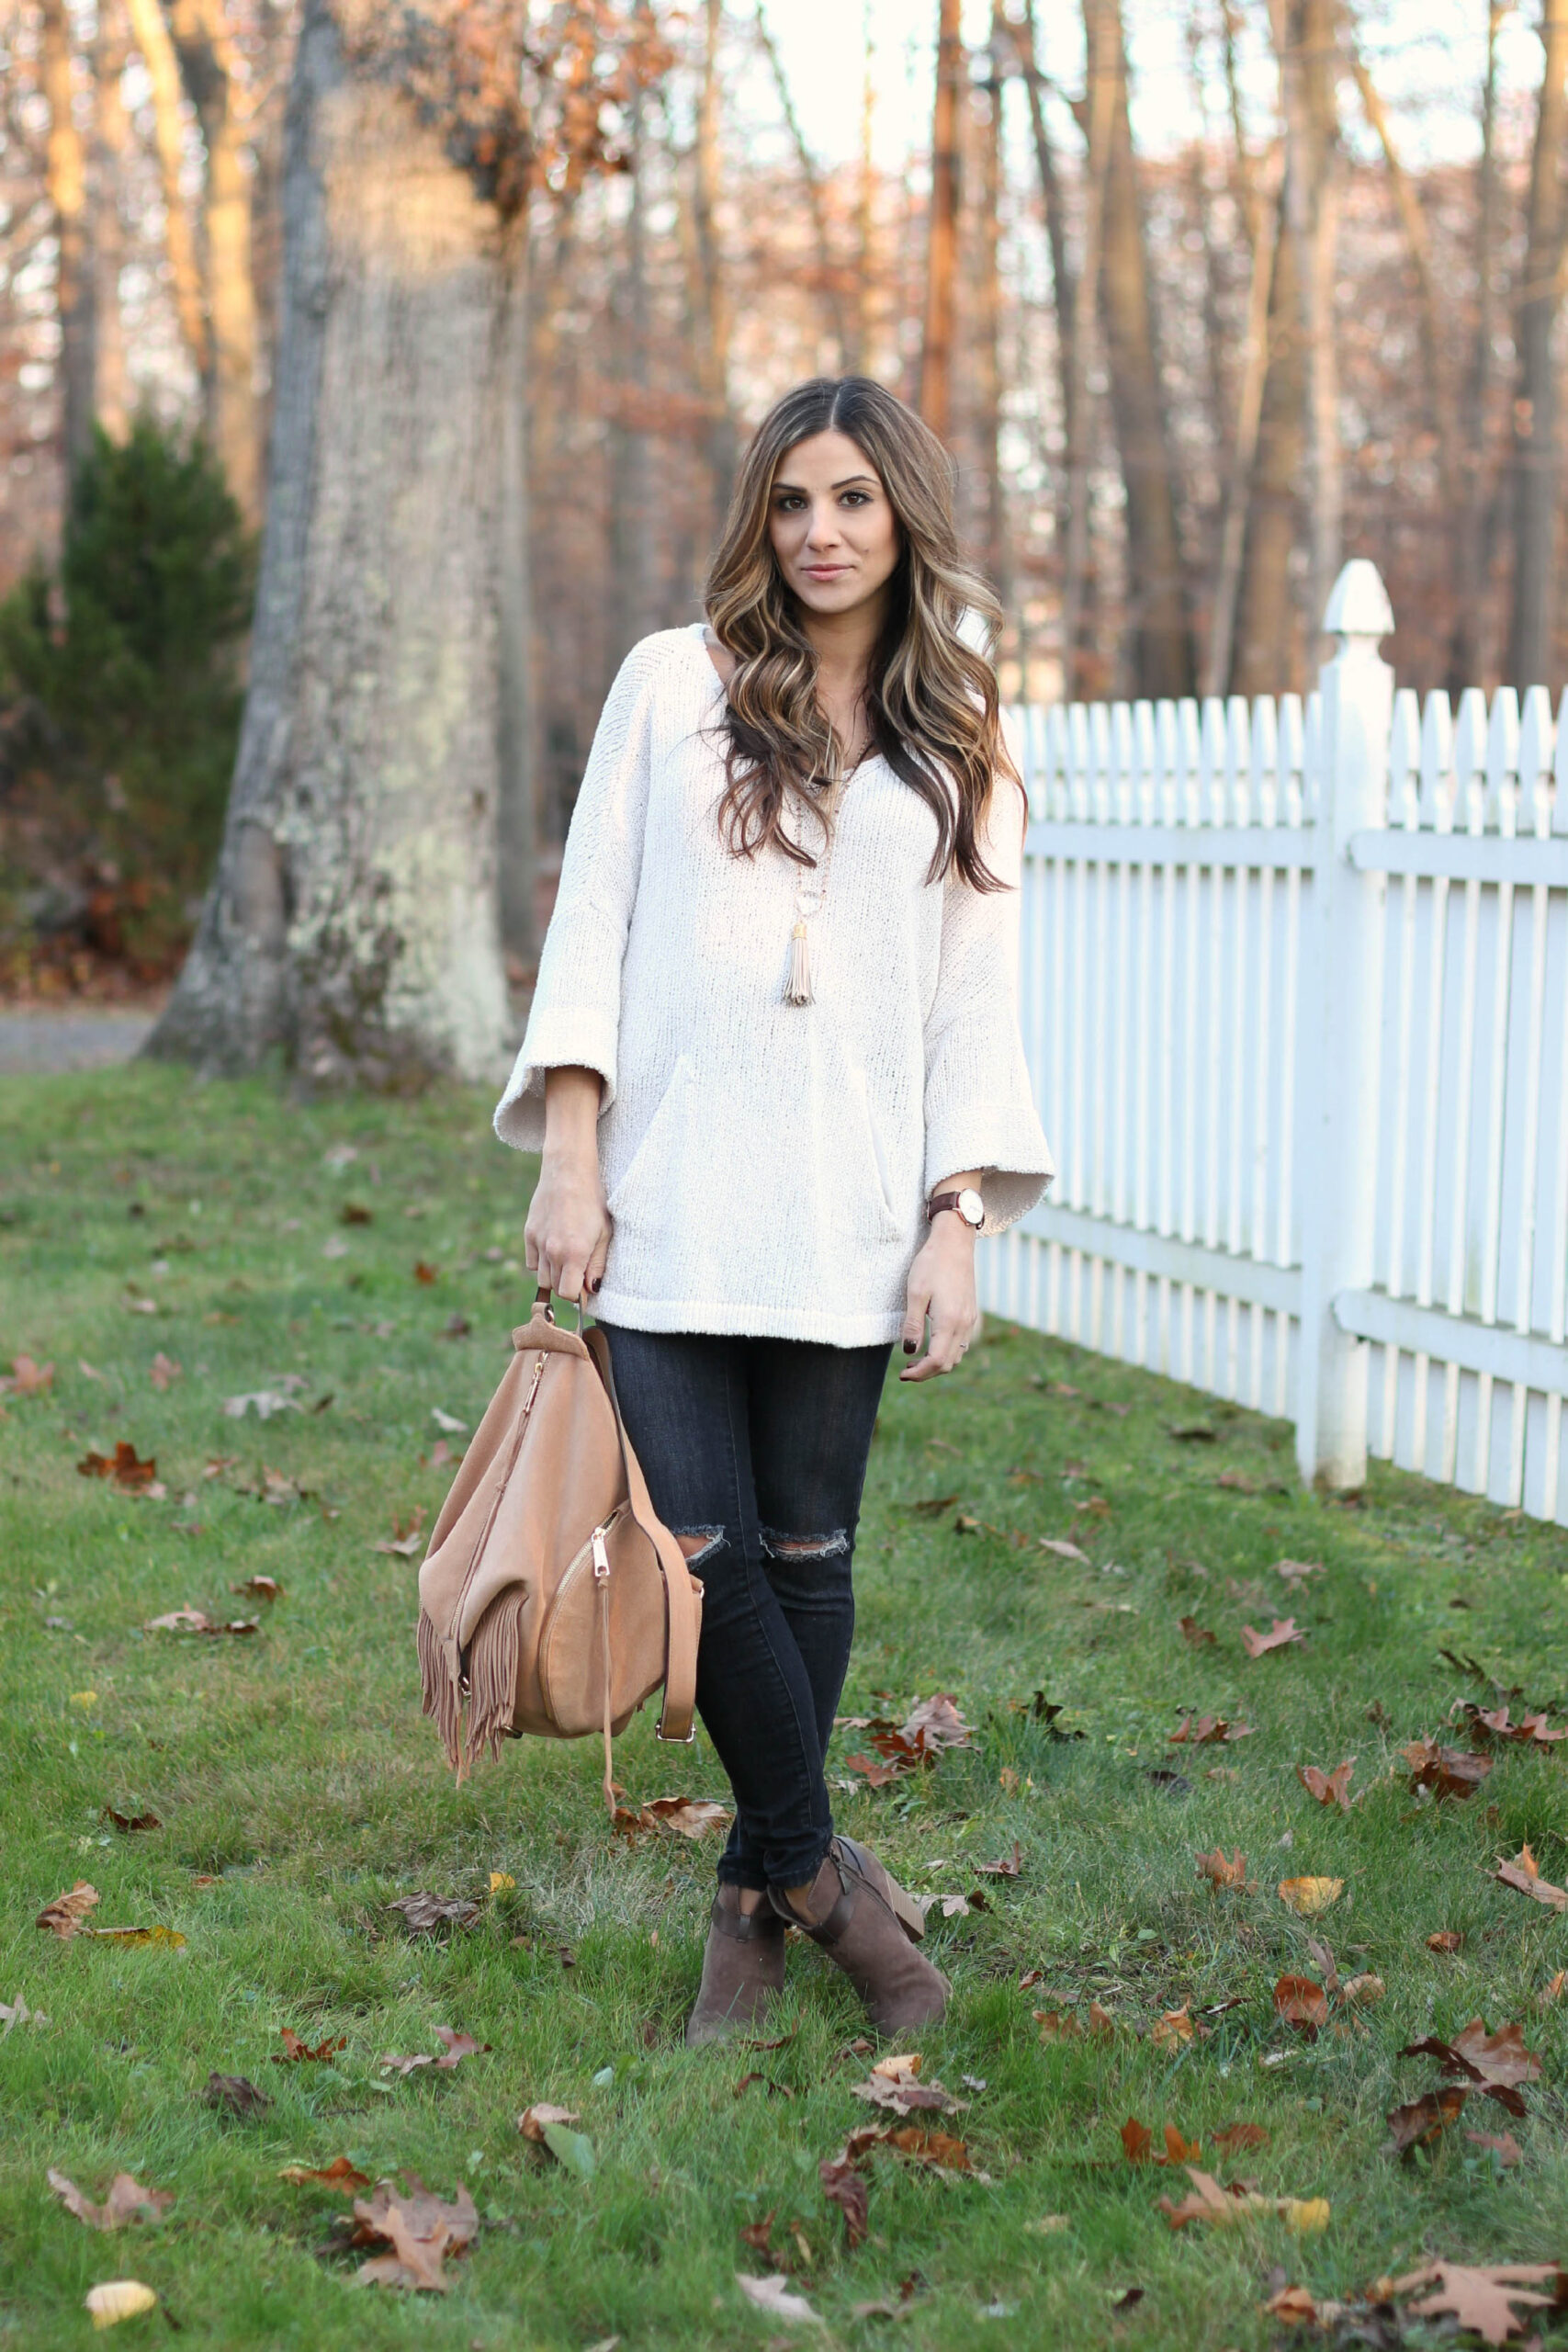 Style // Oversized Sweater and Distressed Jeans - Lauren McBride